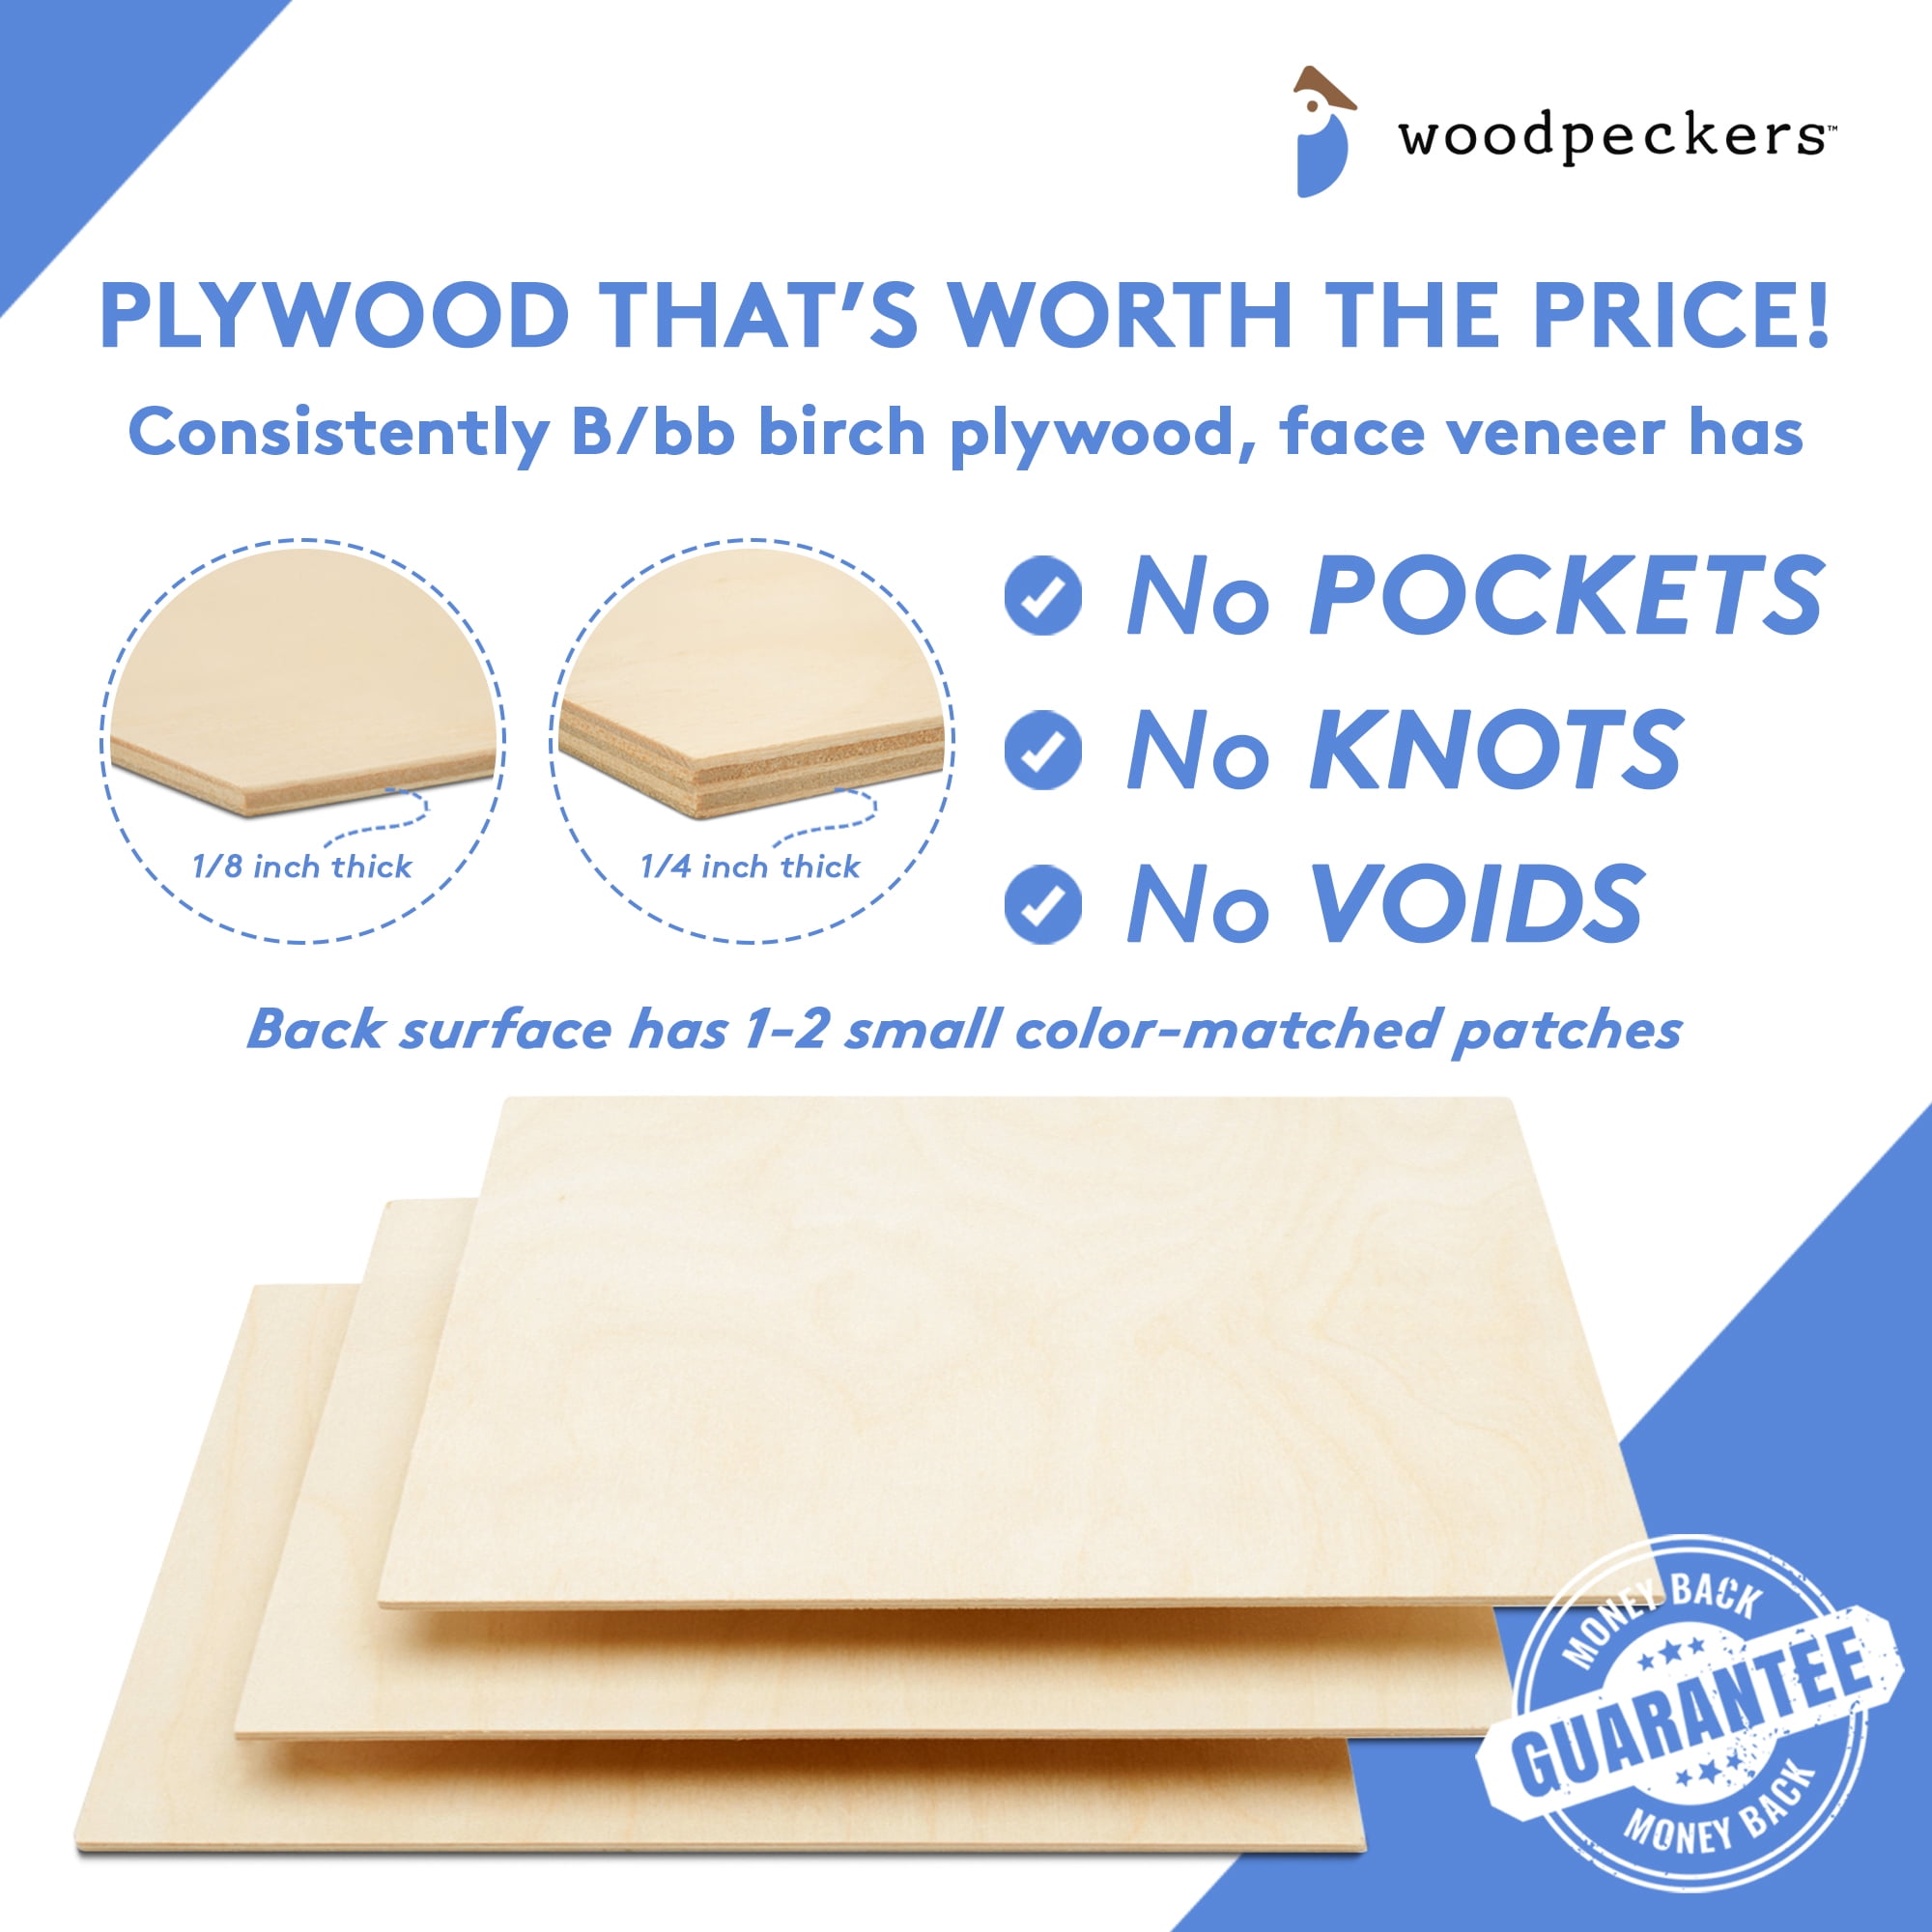 12x12 Wood Panels, Unfinished 3mm Birch Plywood Sheets (8 Pack)